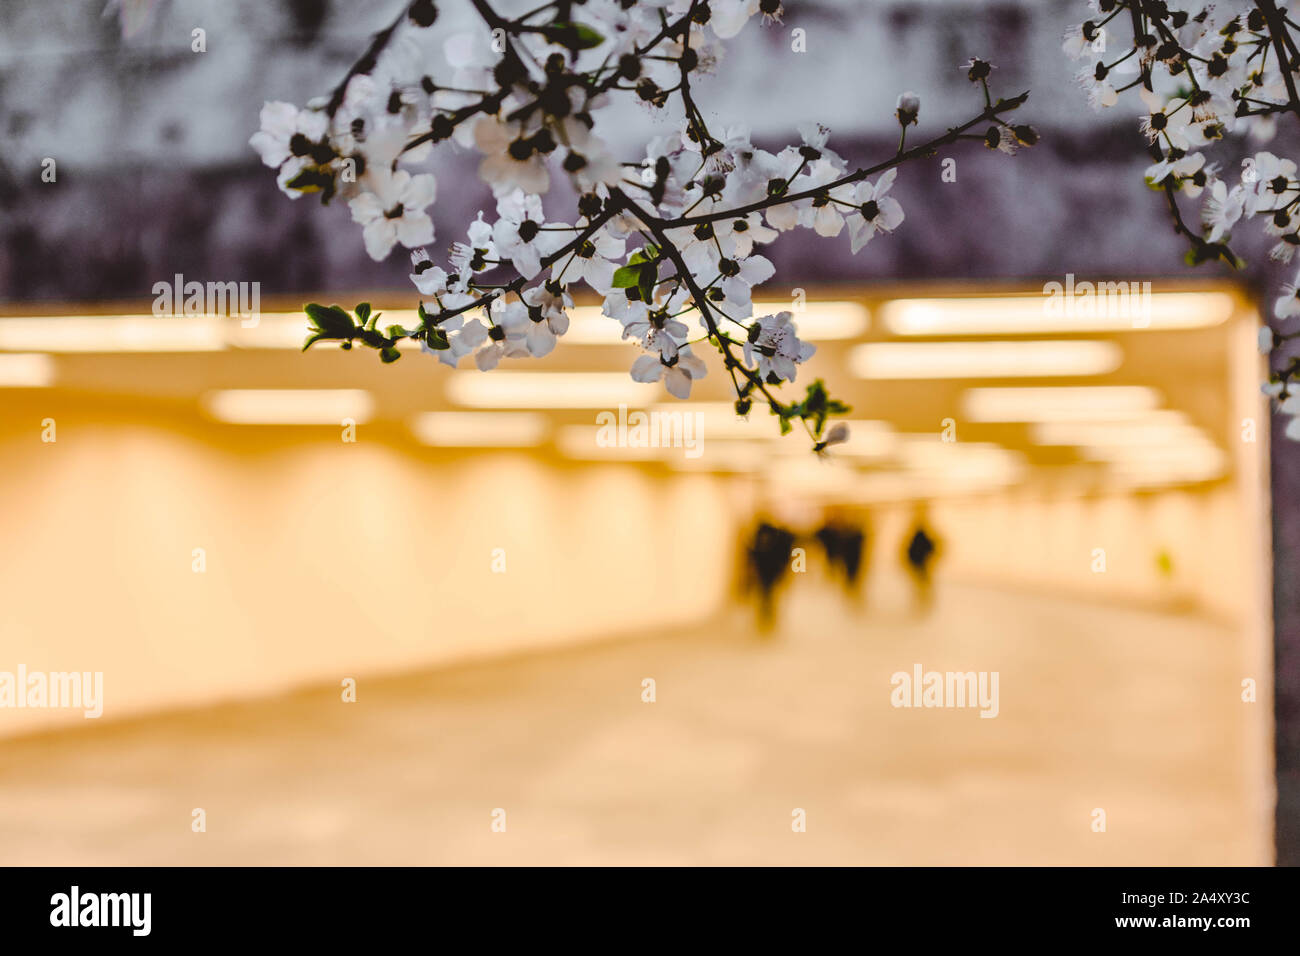 White cherry blossoms in Budapest on blurred pedestrian tunnel background. Stock Photo